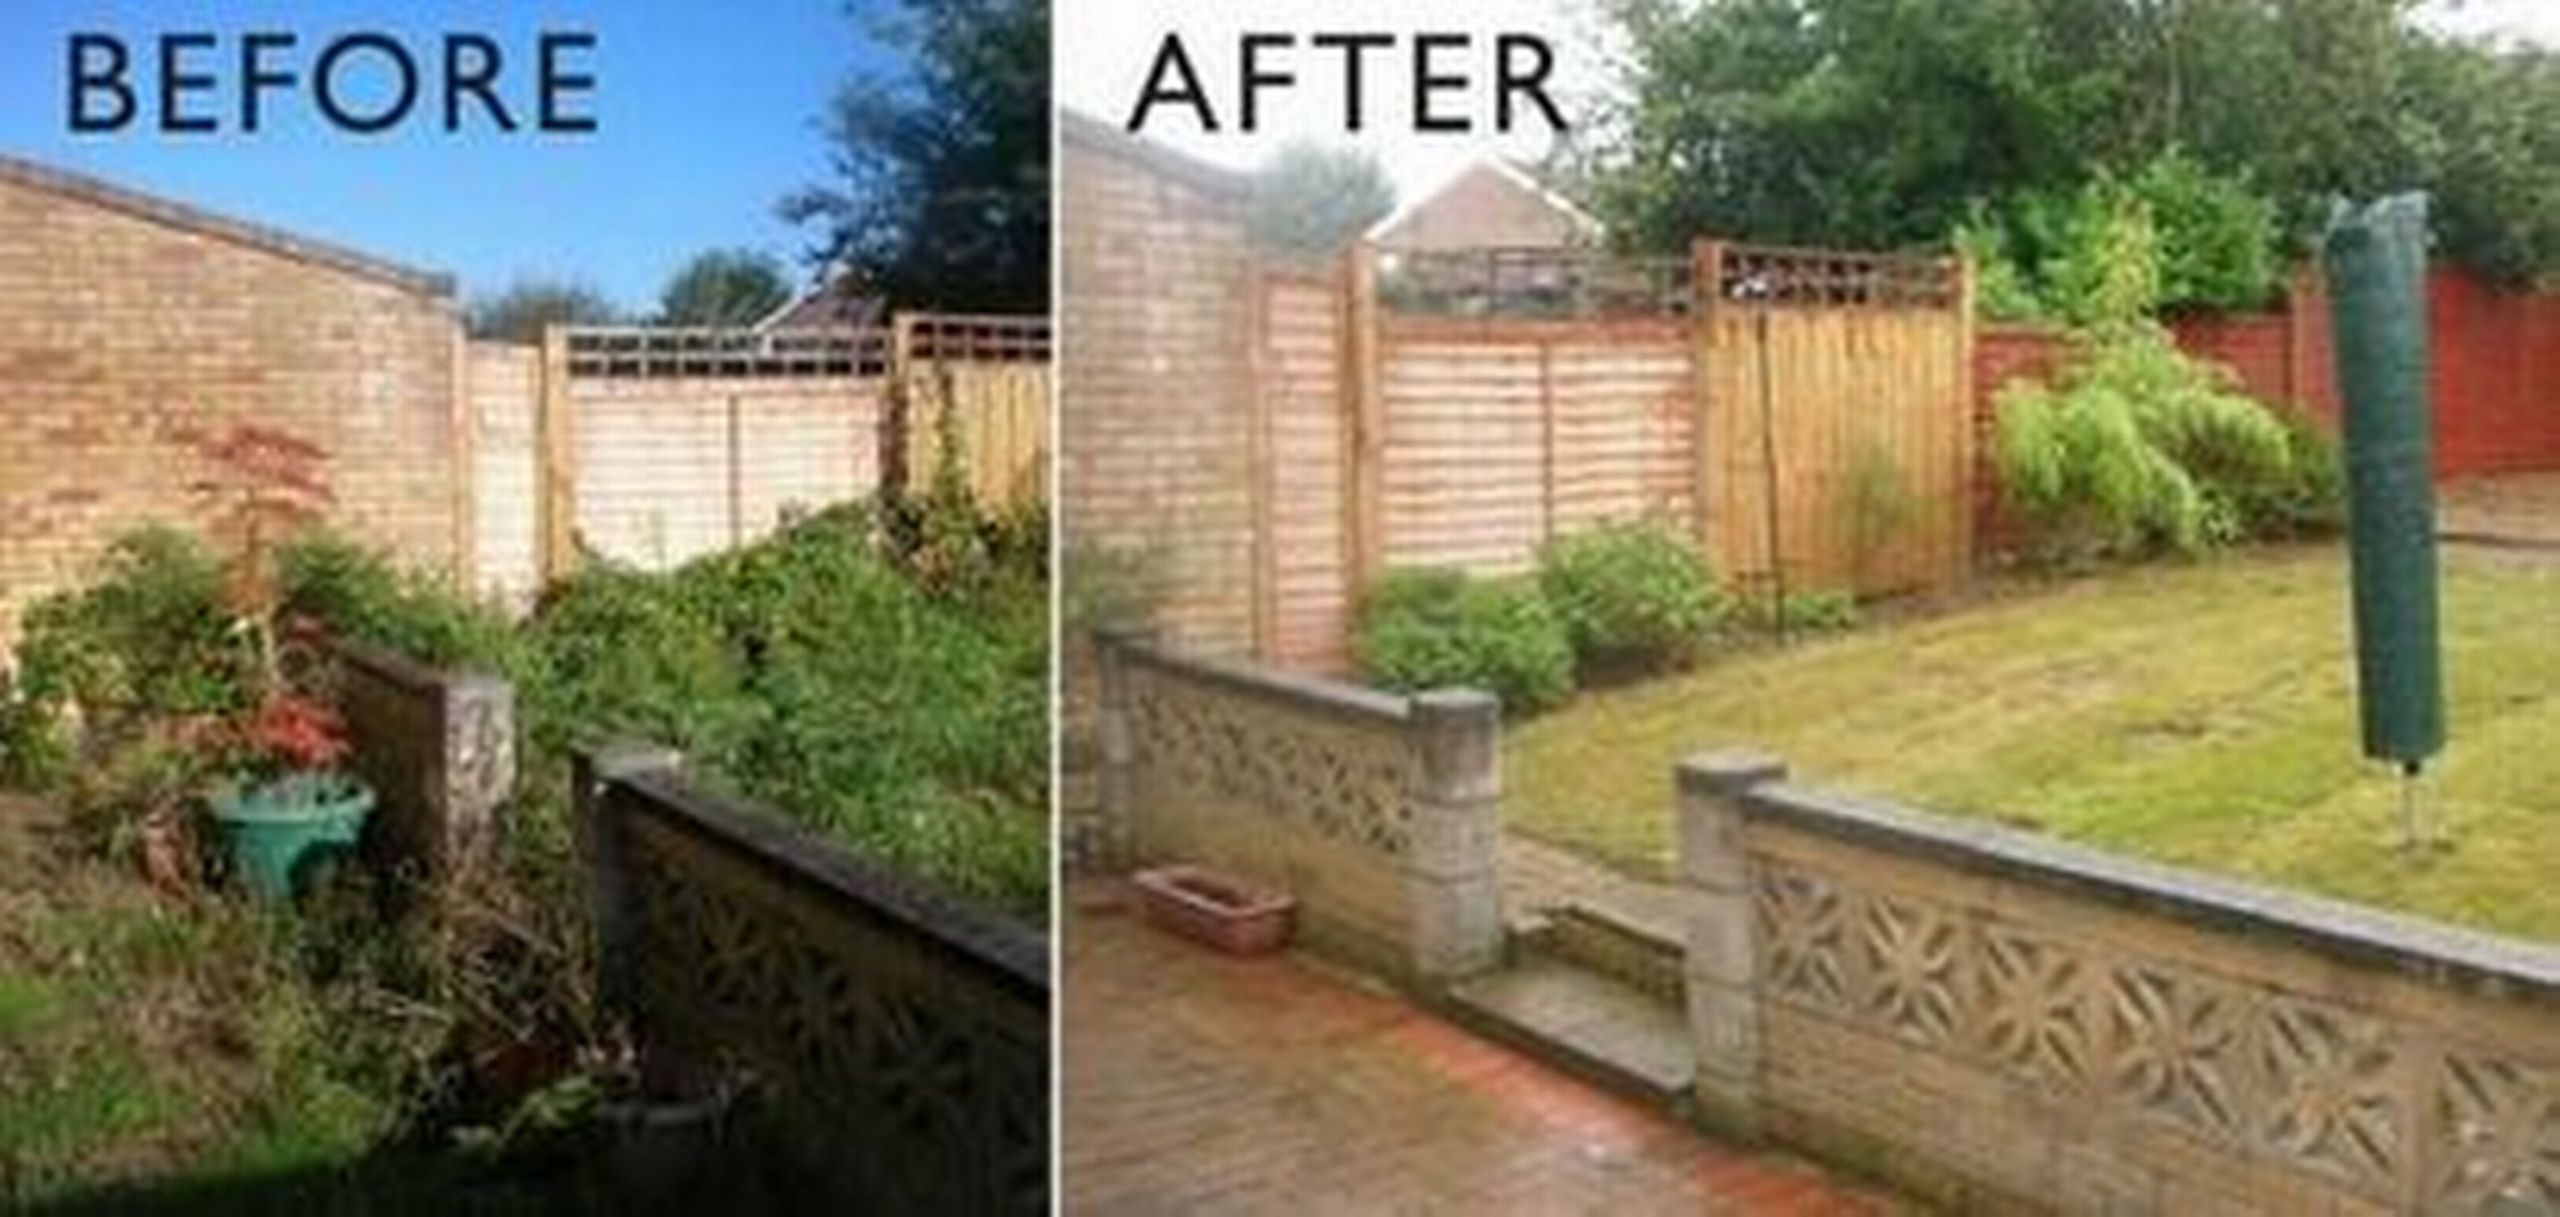 Outdoor Landscape Before And After
 Before and After Gardens Manchester Evening News